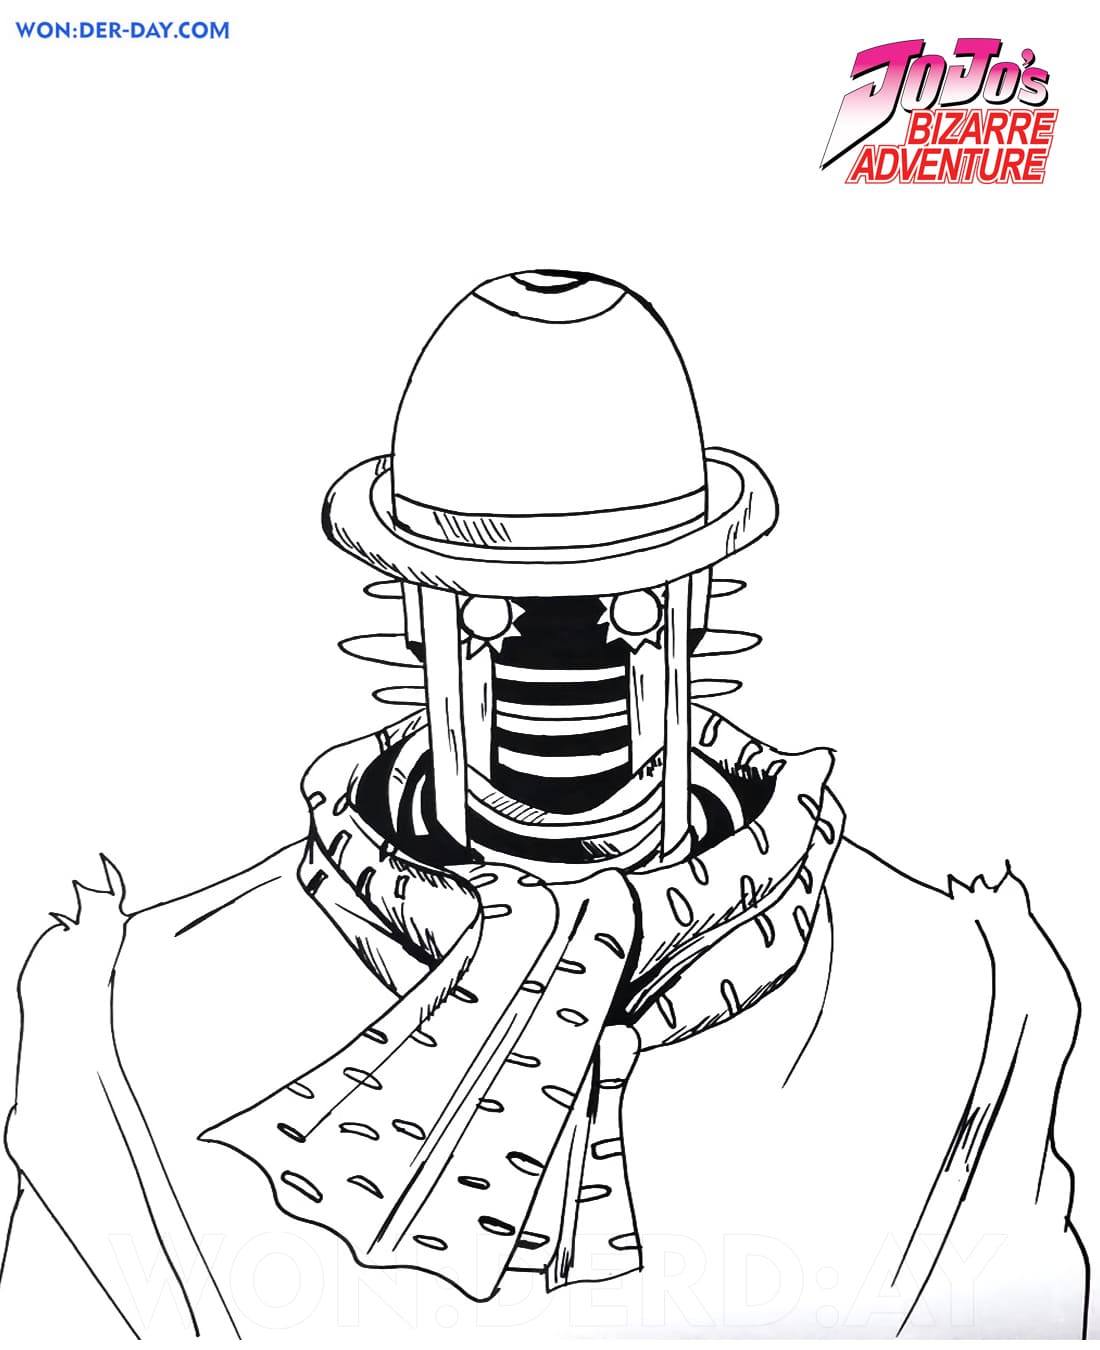 JoJo&39;s Bizarre Adventure coloring pages   WONDER DAY — Coloring pages ...